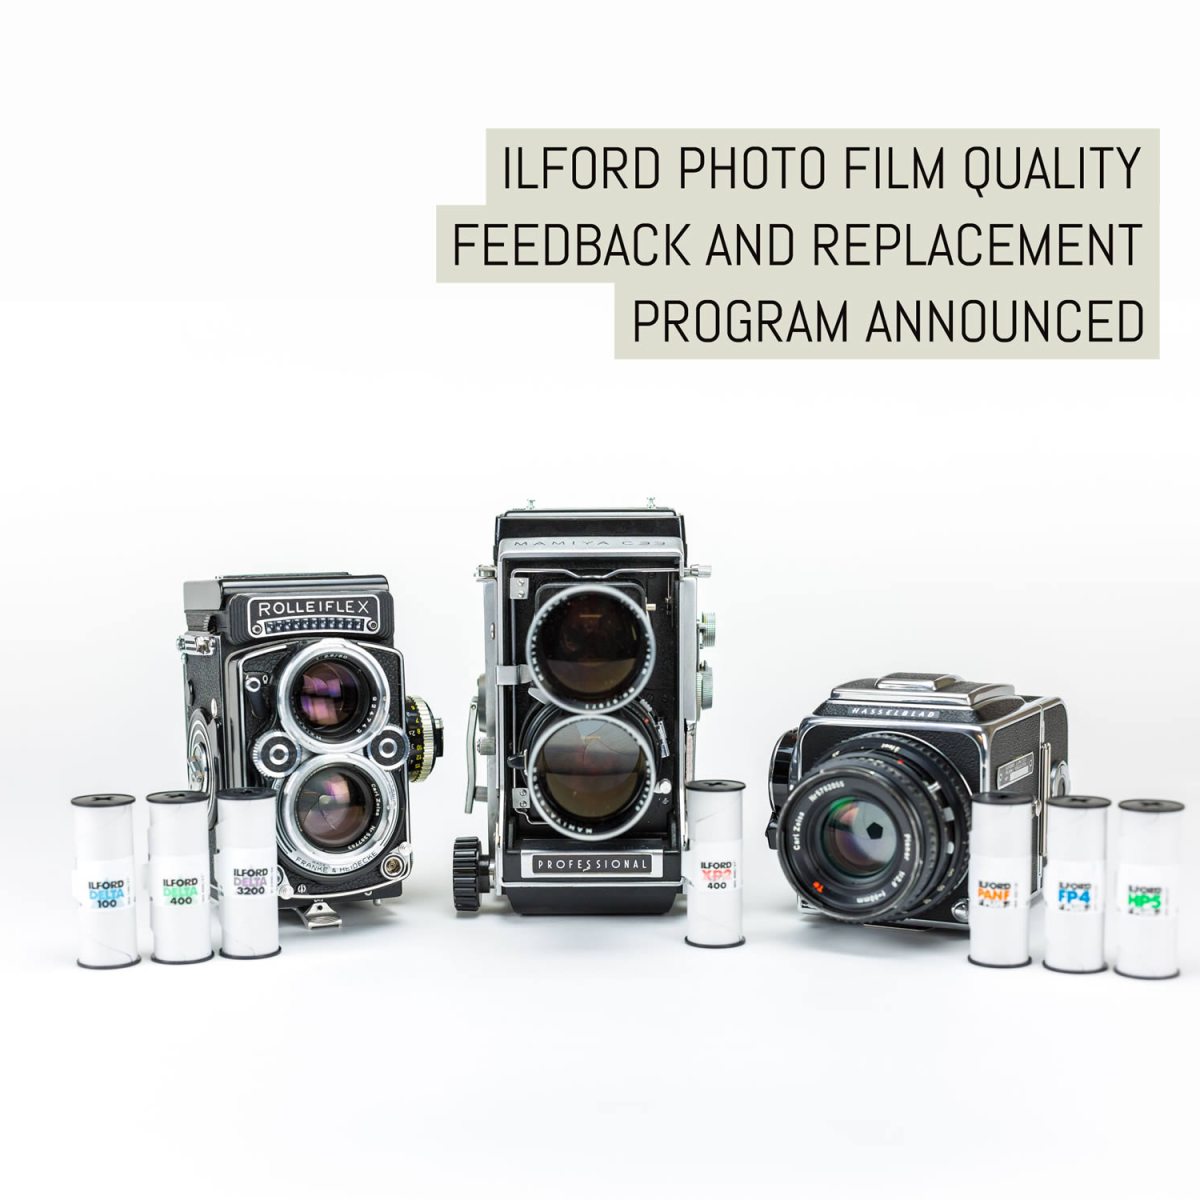 ILFORD Photo film quality feedback and replacement program announced